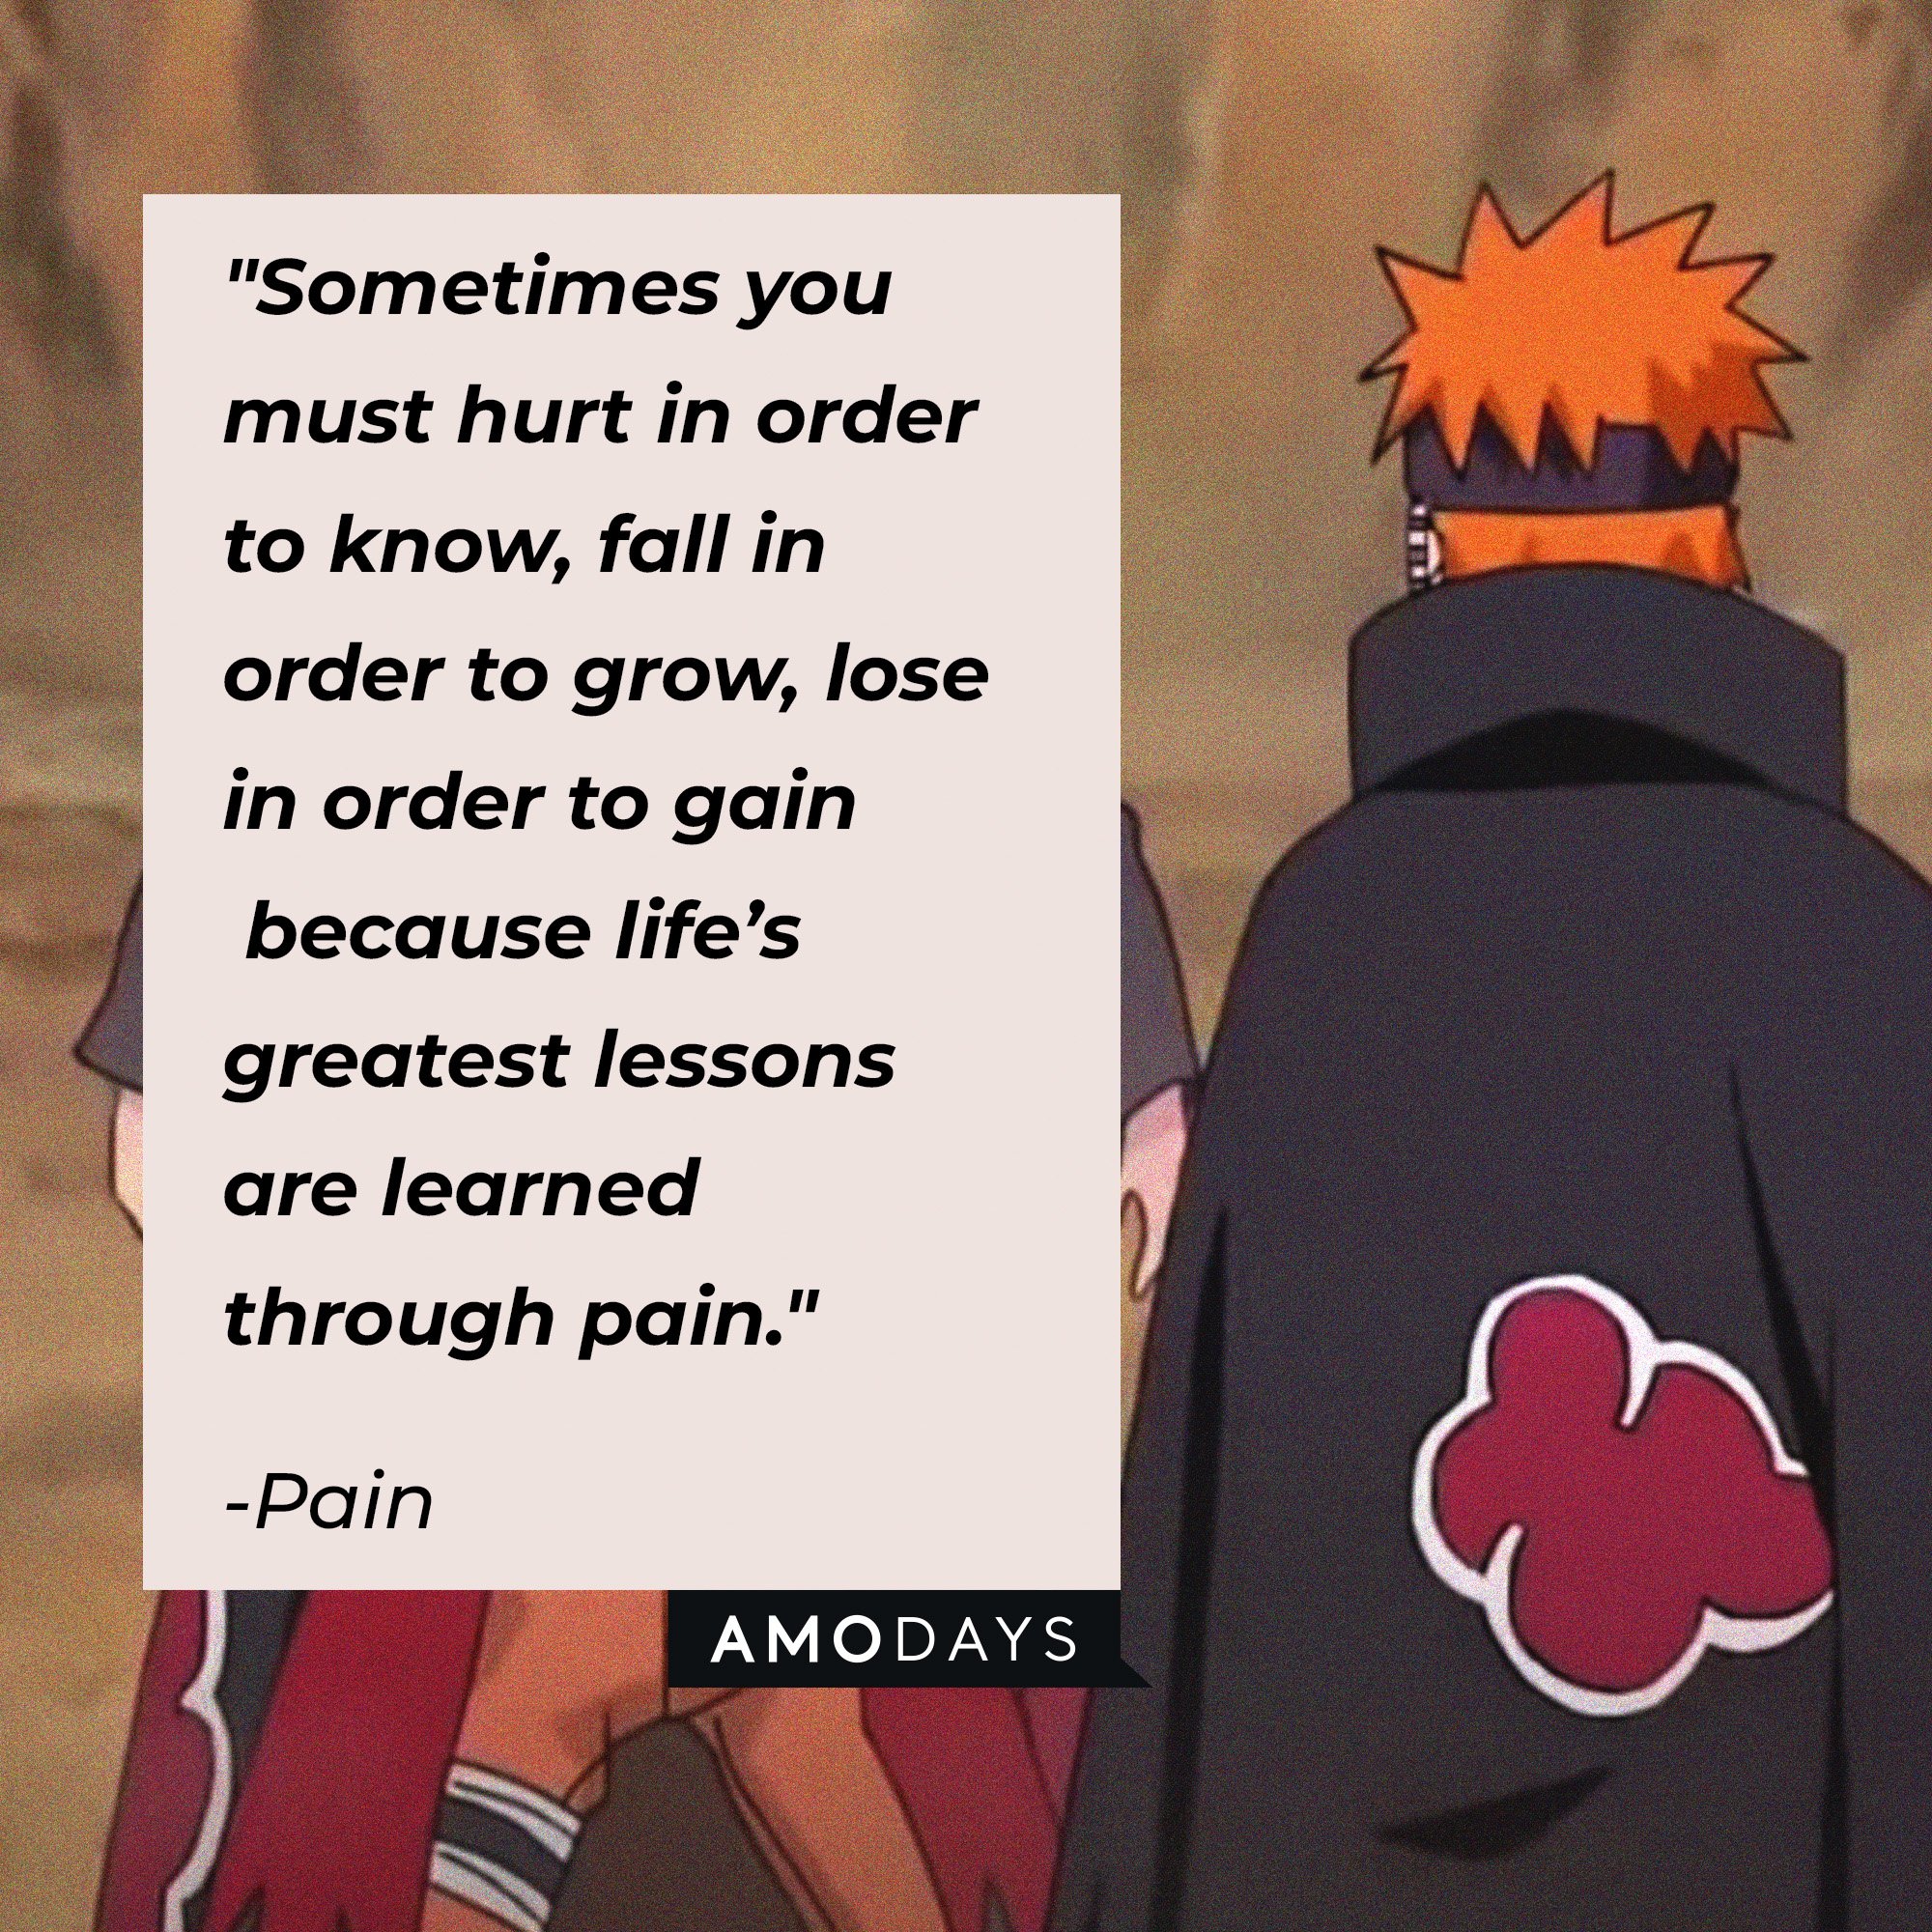  Pain's quote: "Sometimes you must hurt in order to know, fall in order to grow, lose in order to gain because life’s greatest lessons are learned through pain." | Image: AmoDays